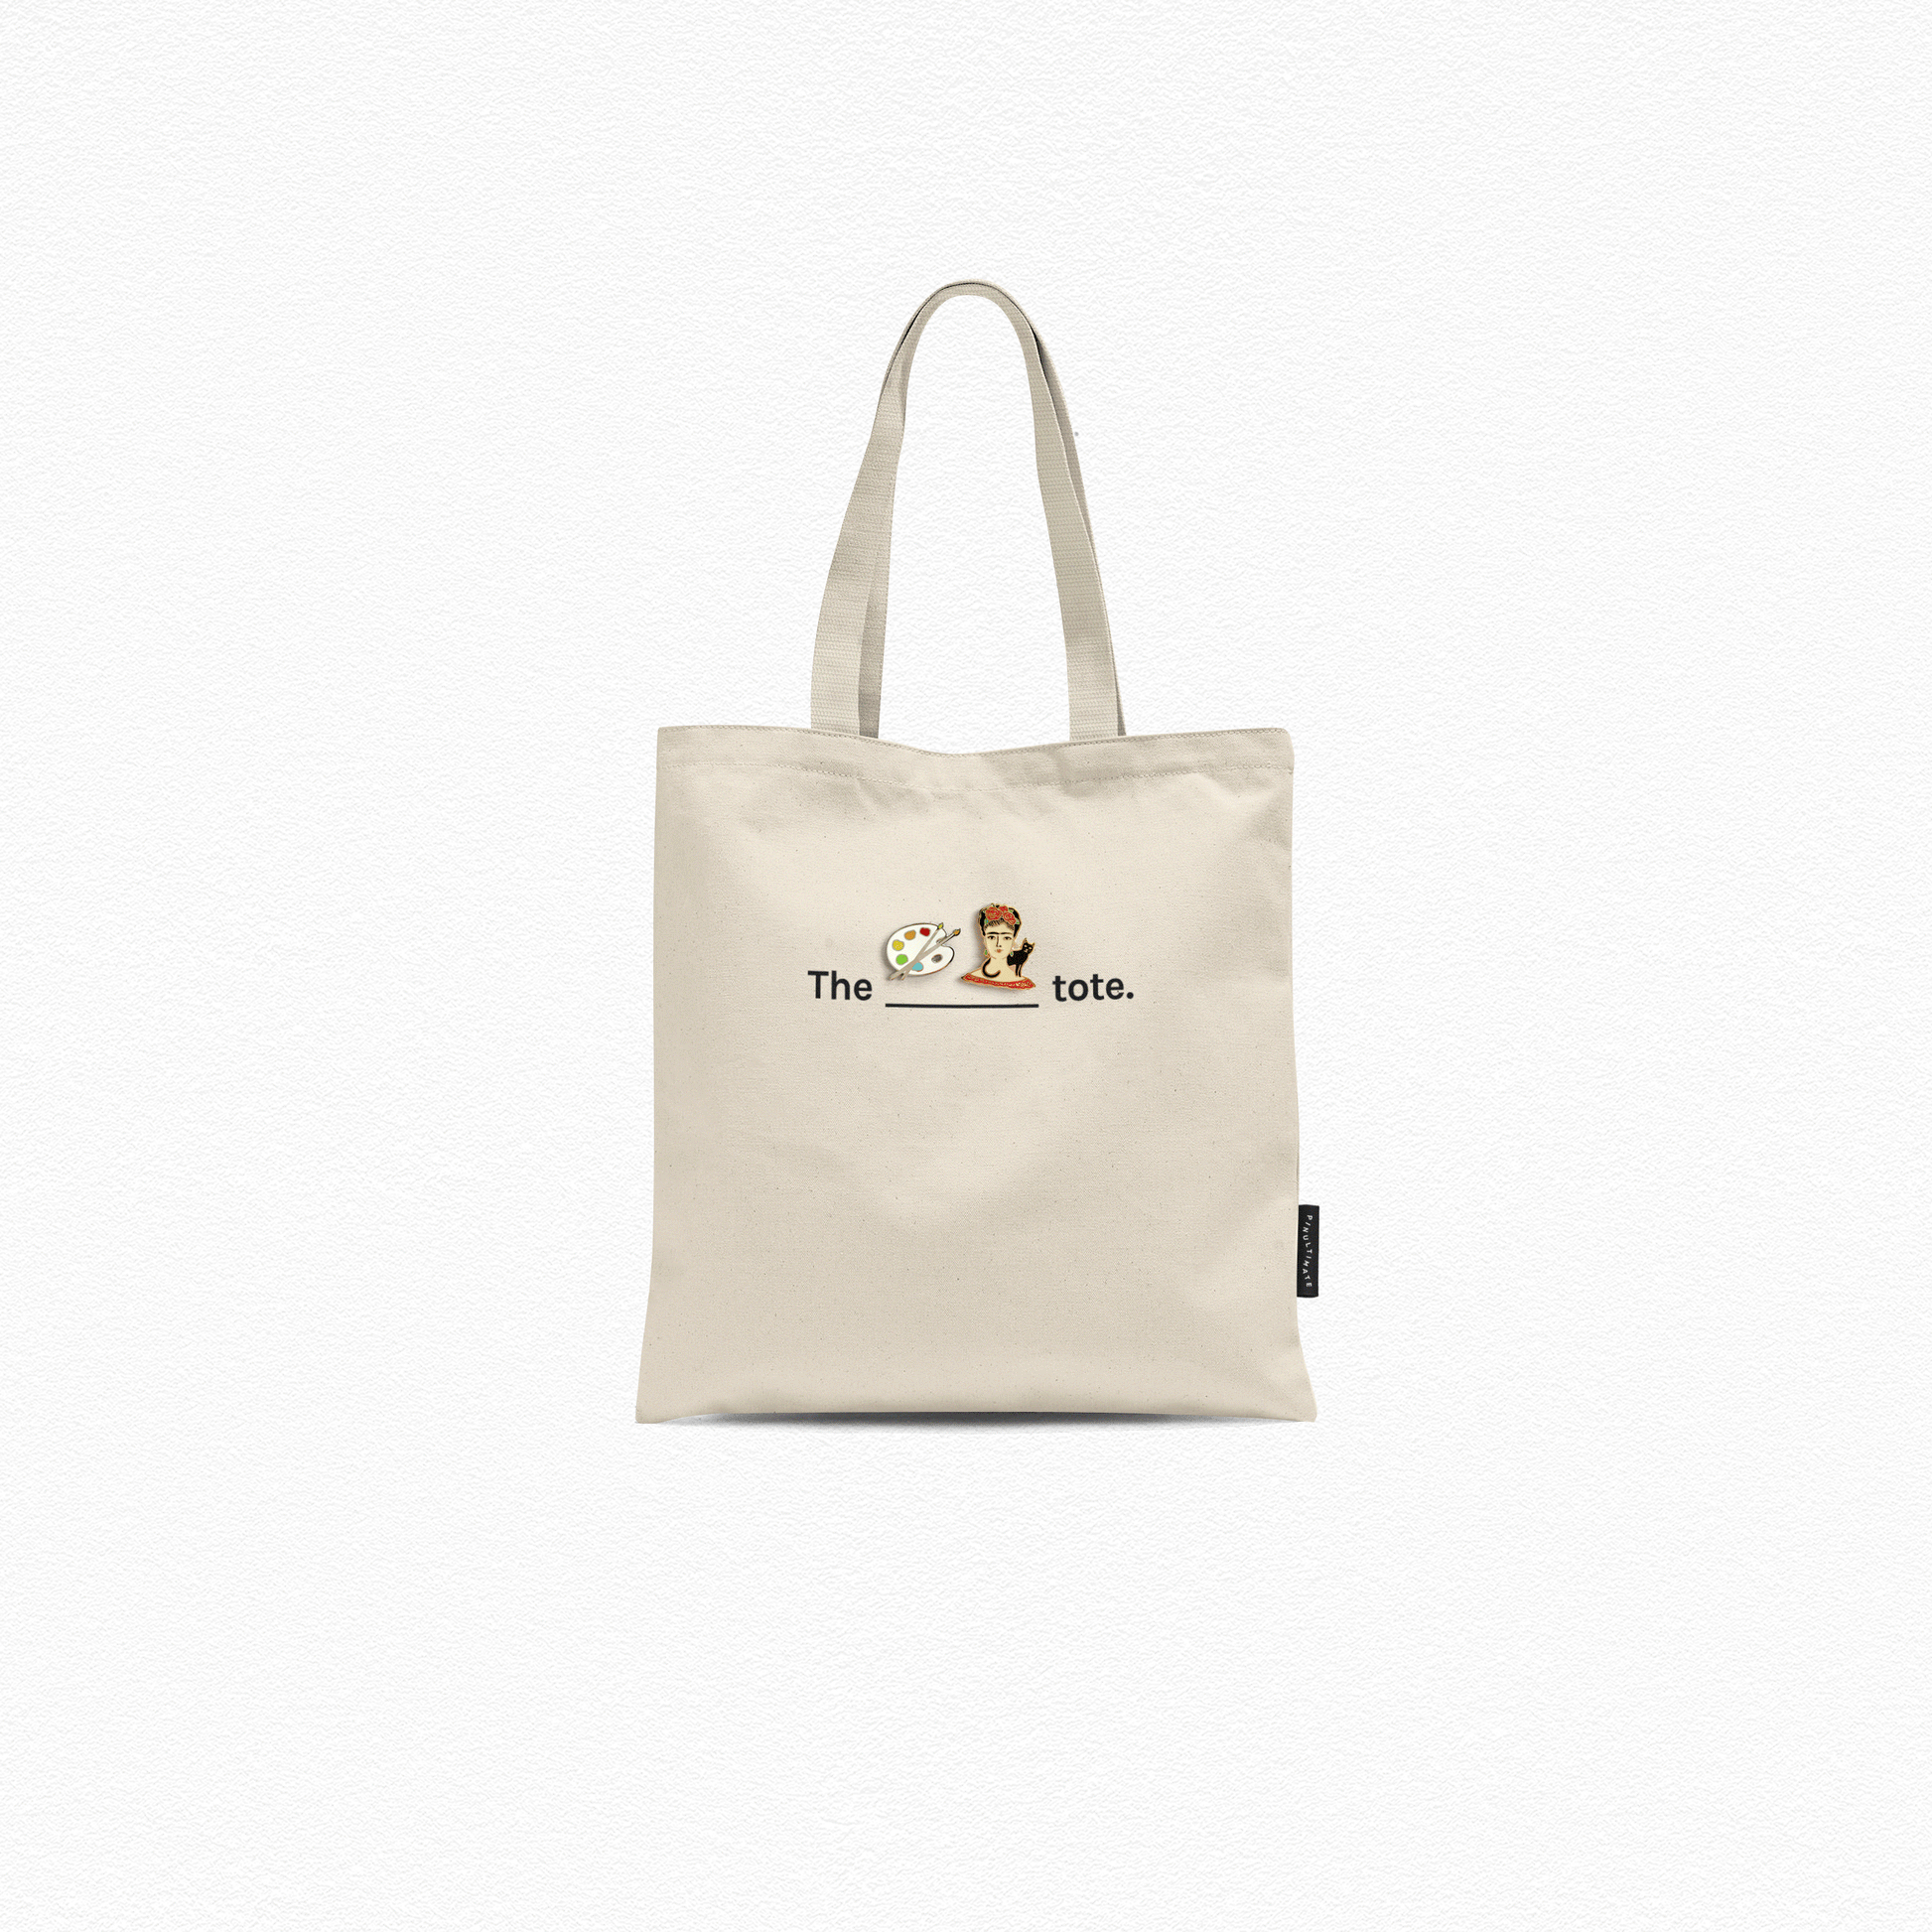 Pin on Totes To Buy